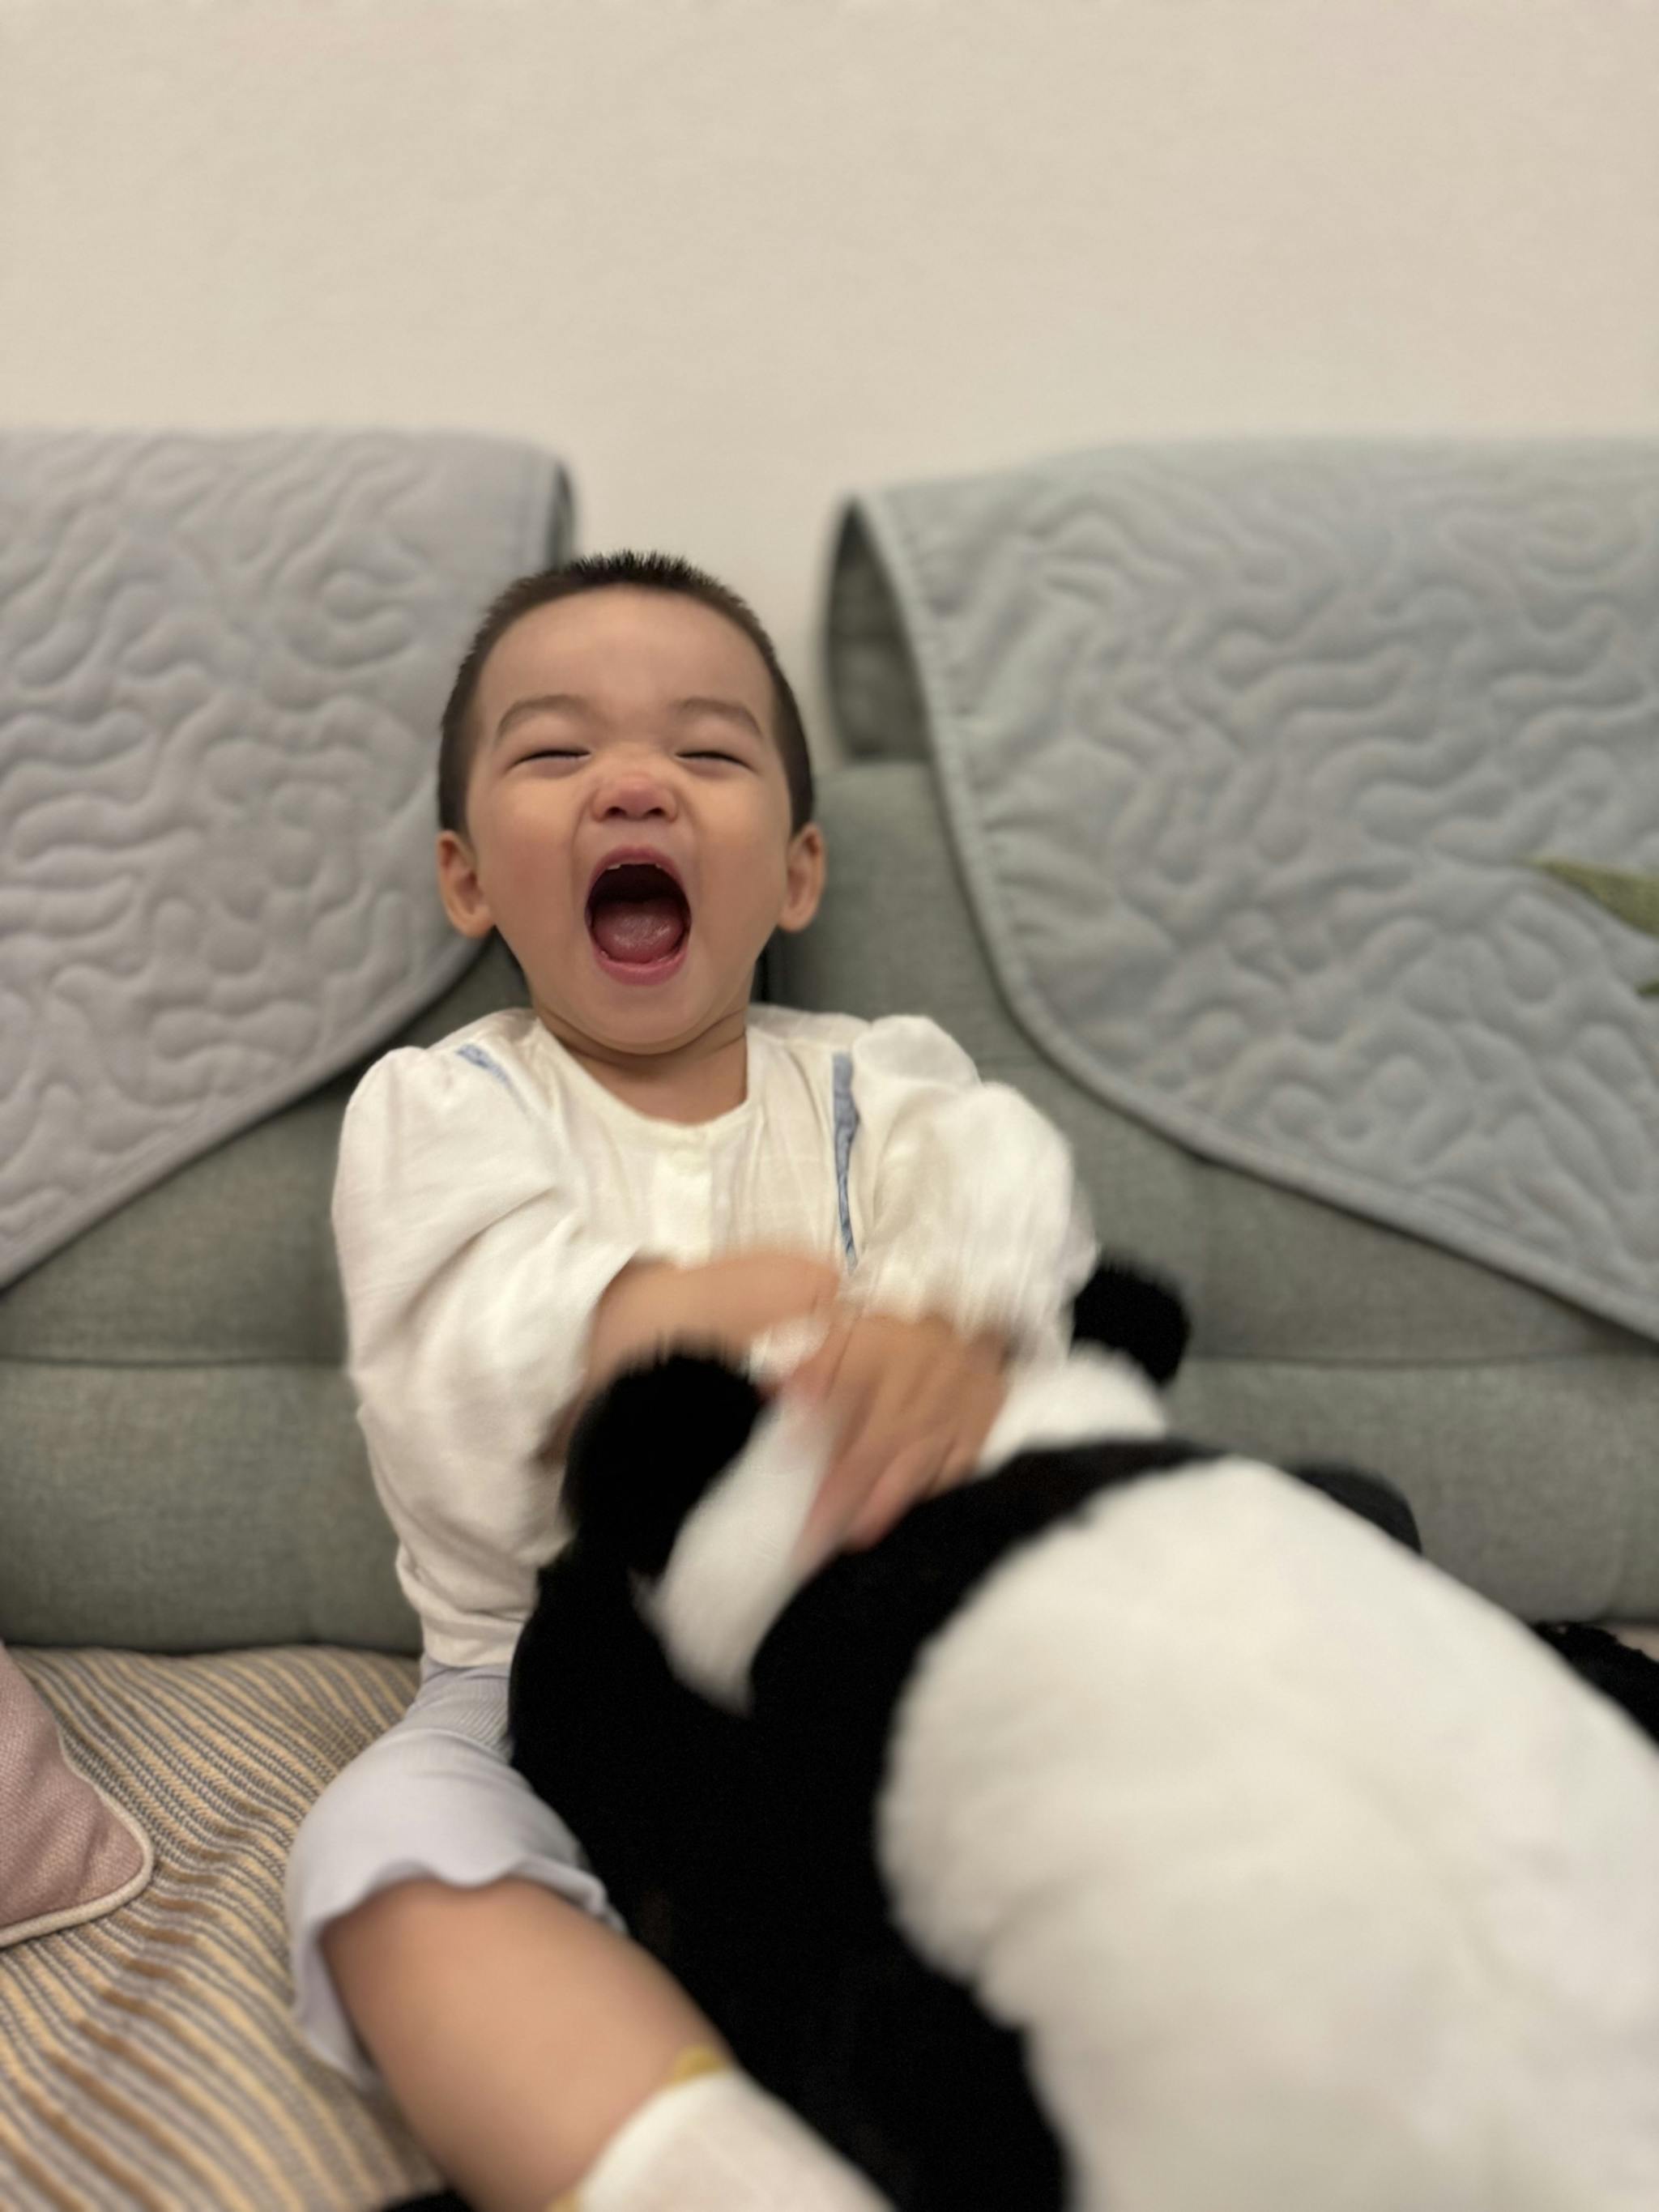 A joyful toddler with an open mouth is sitting on a couch, holding a black and white stuffed animal